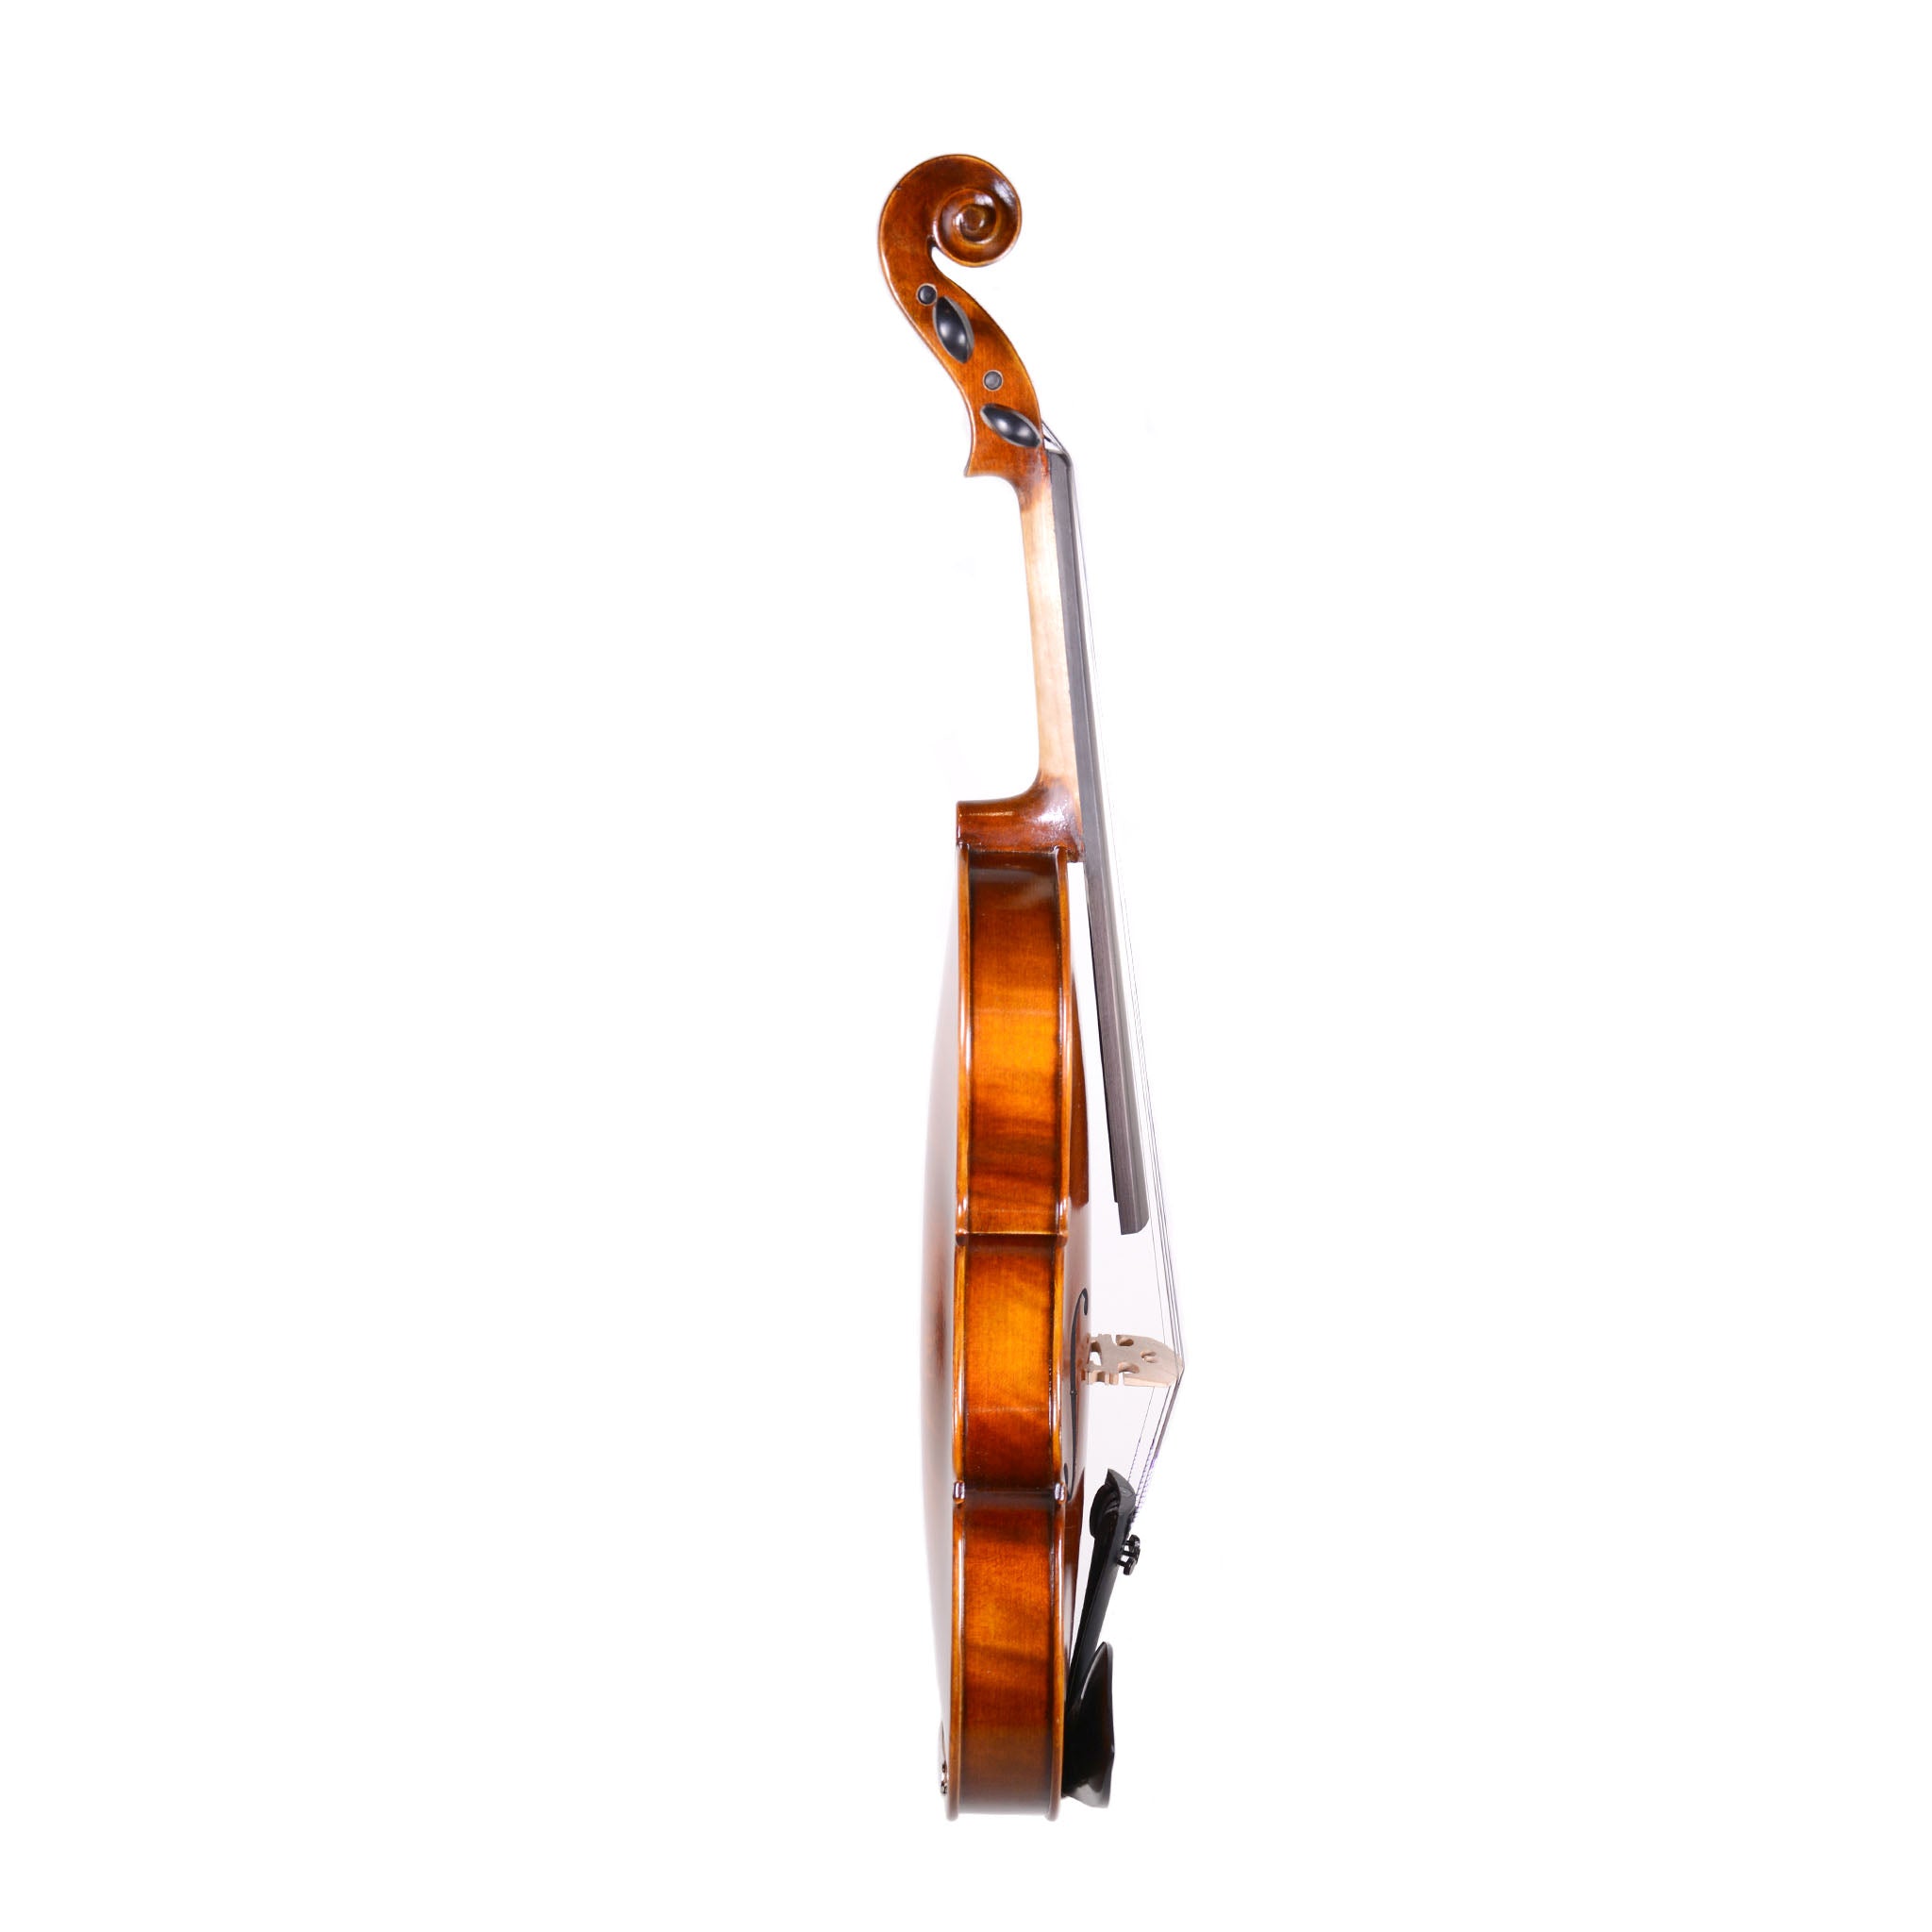 B-Stock Fiddlerman Concert Violin Outfit